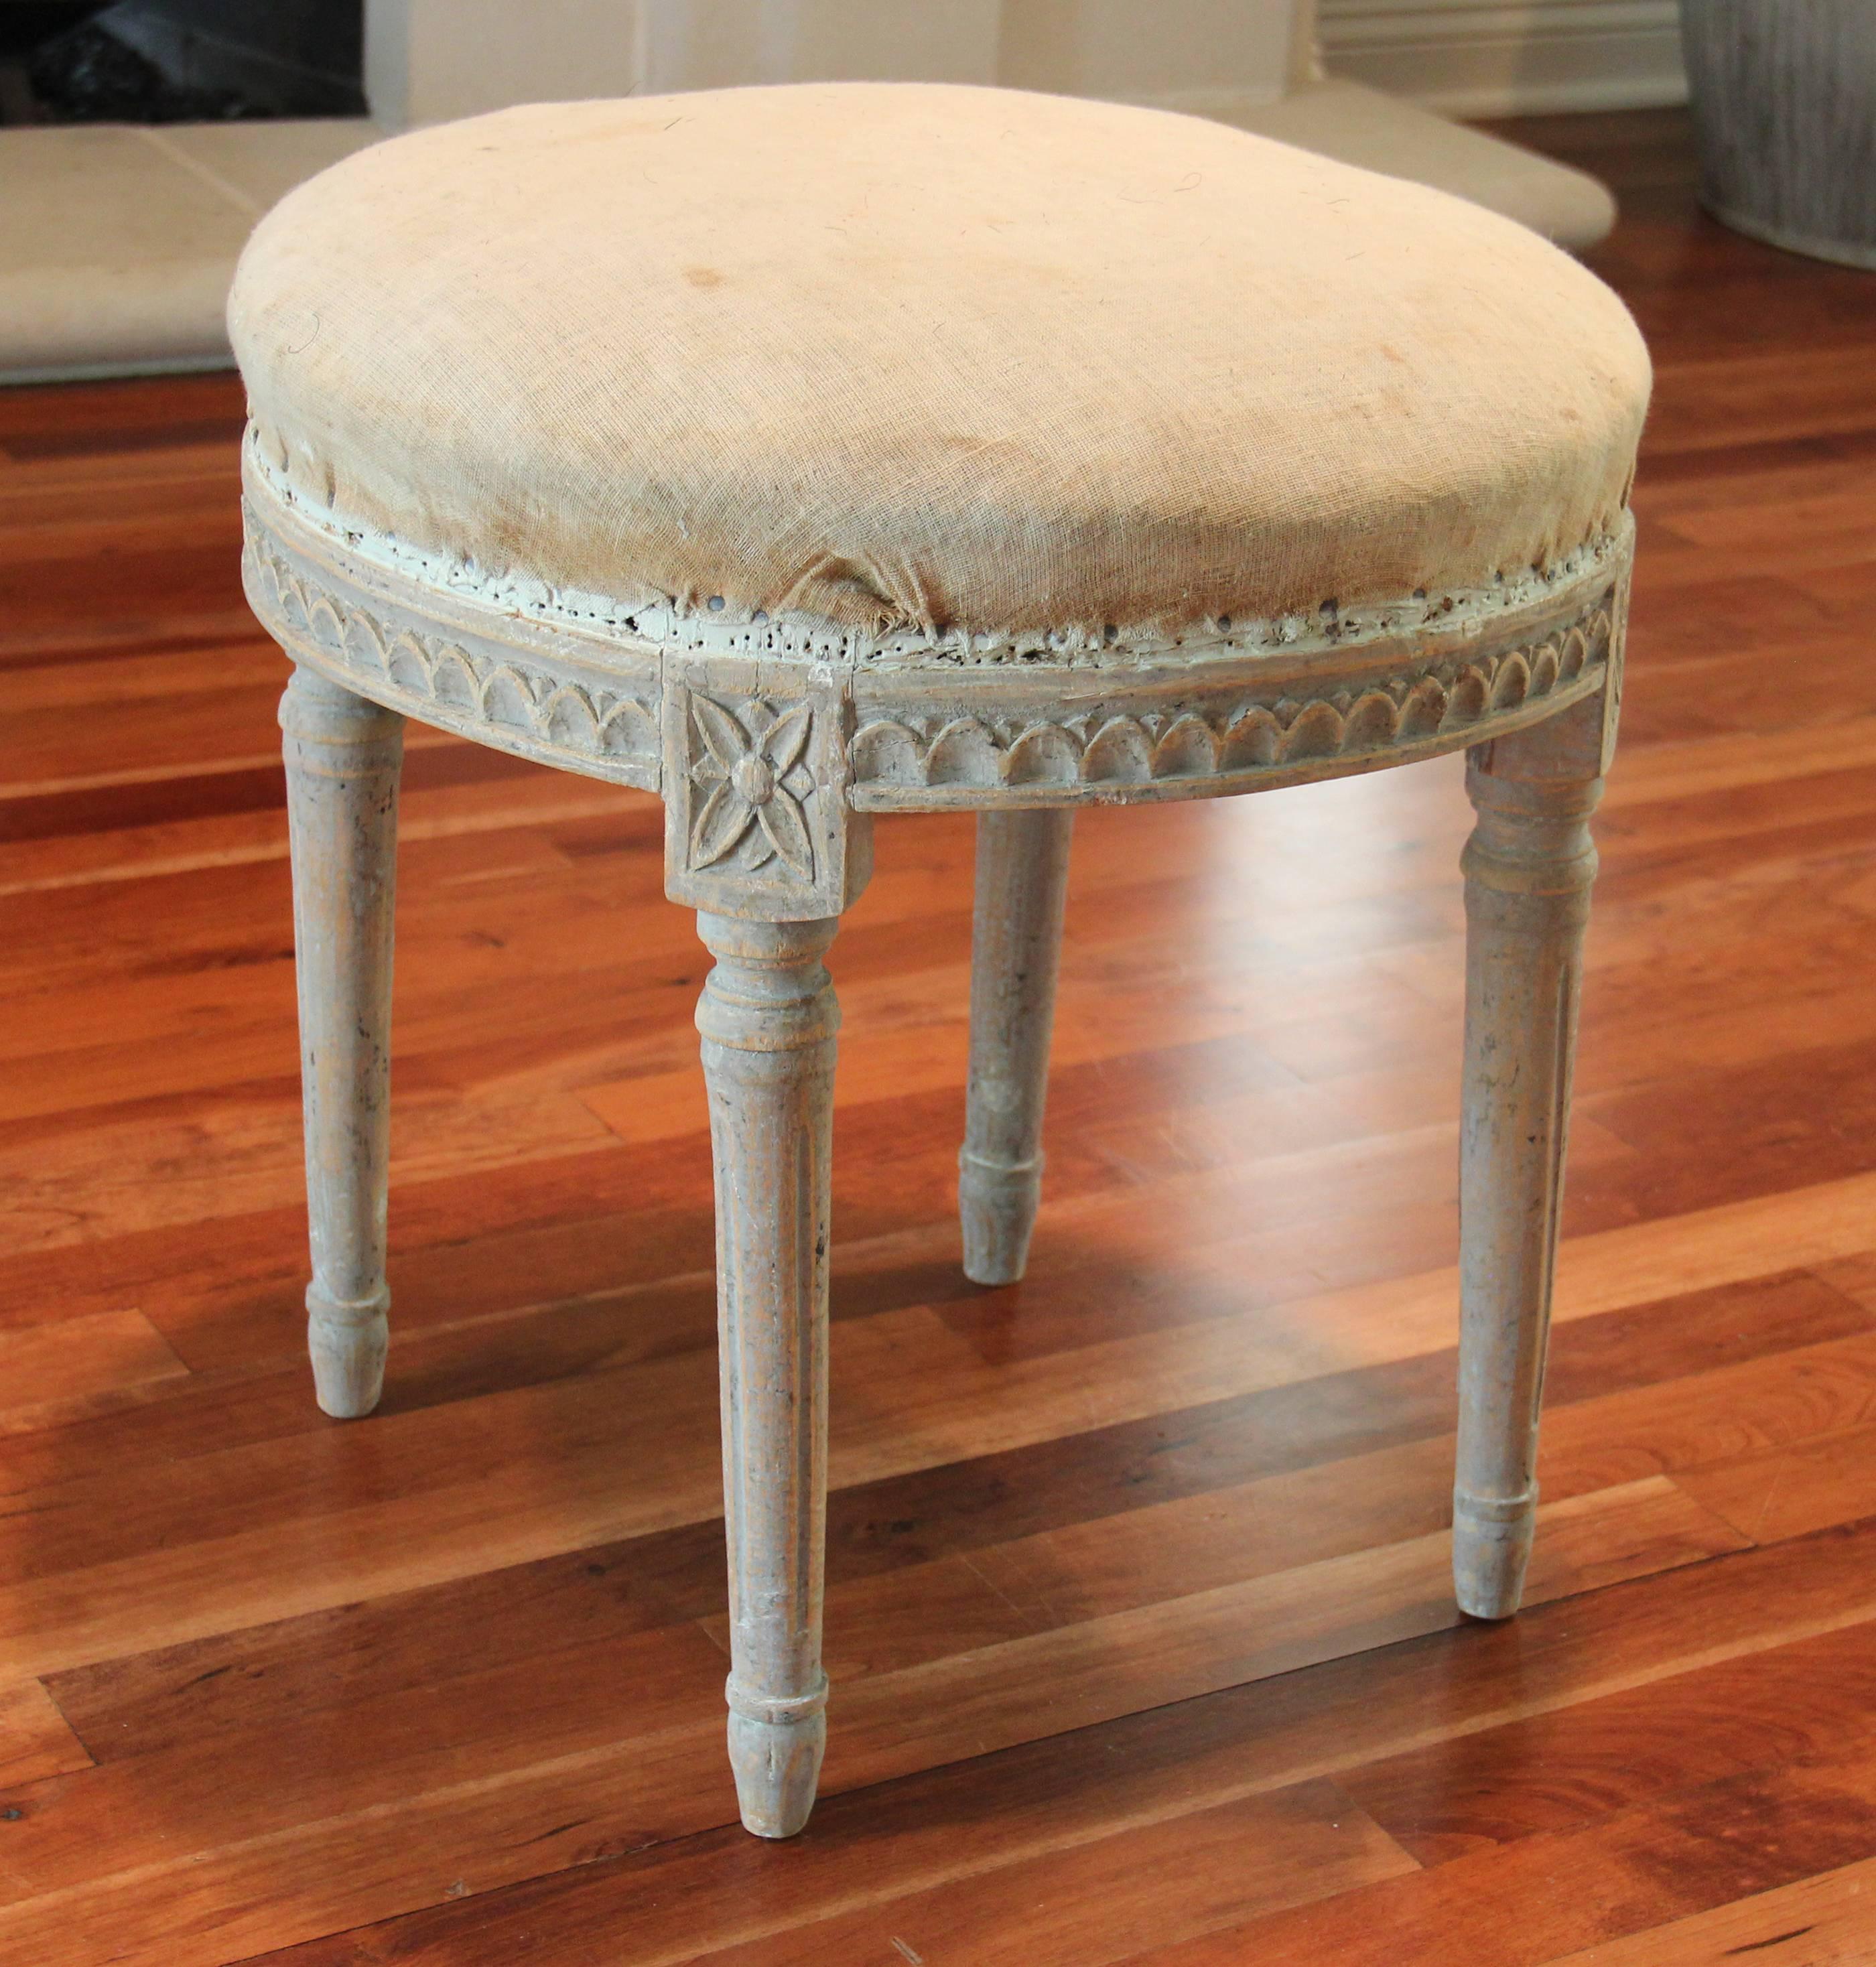 A very special Swedish early Gustavian period round stool with original horse hair seat.  This charming stool has retained its original Gustavian blue-gray paint.  There is carved egg-and-dart detail around the apron with tapered and fluted legs